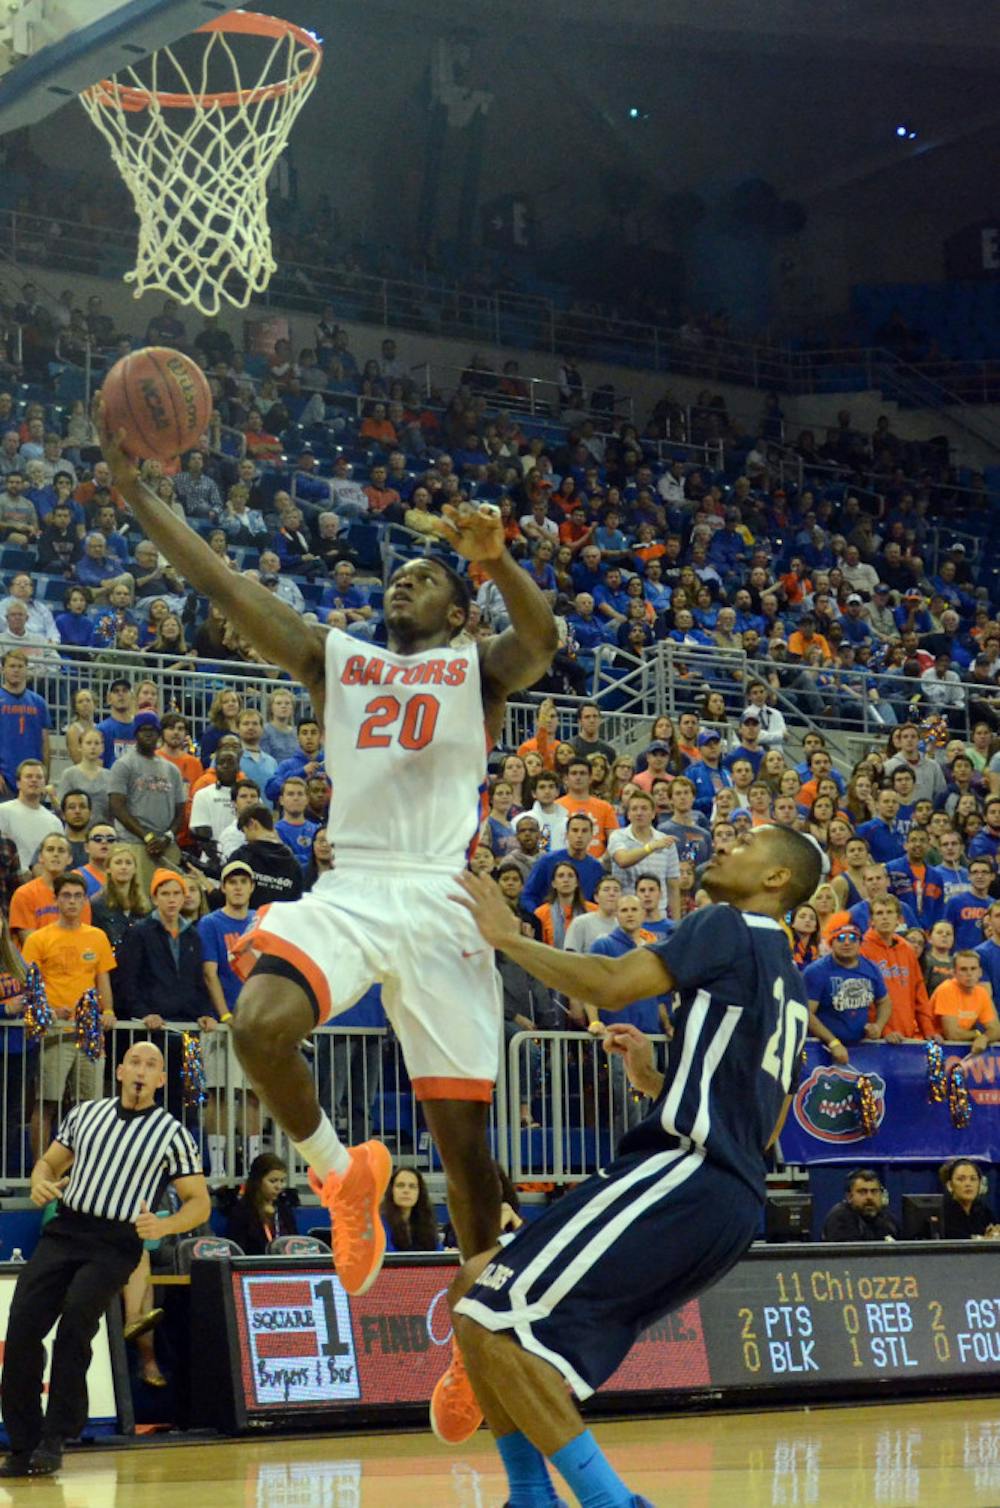 <p><span>Michael Frazier II attempts a layup during Florida's win against Yale on Monday in the O'Connell Center.</span></p>